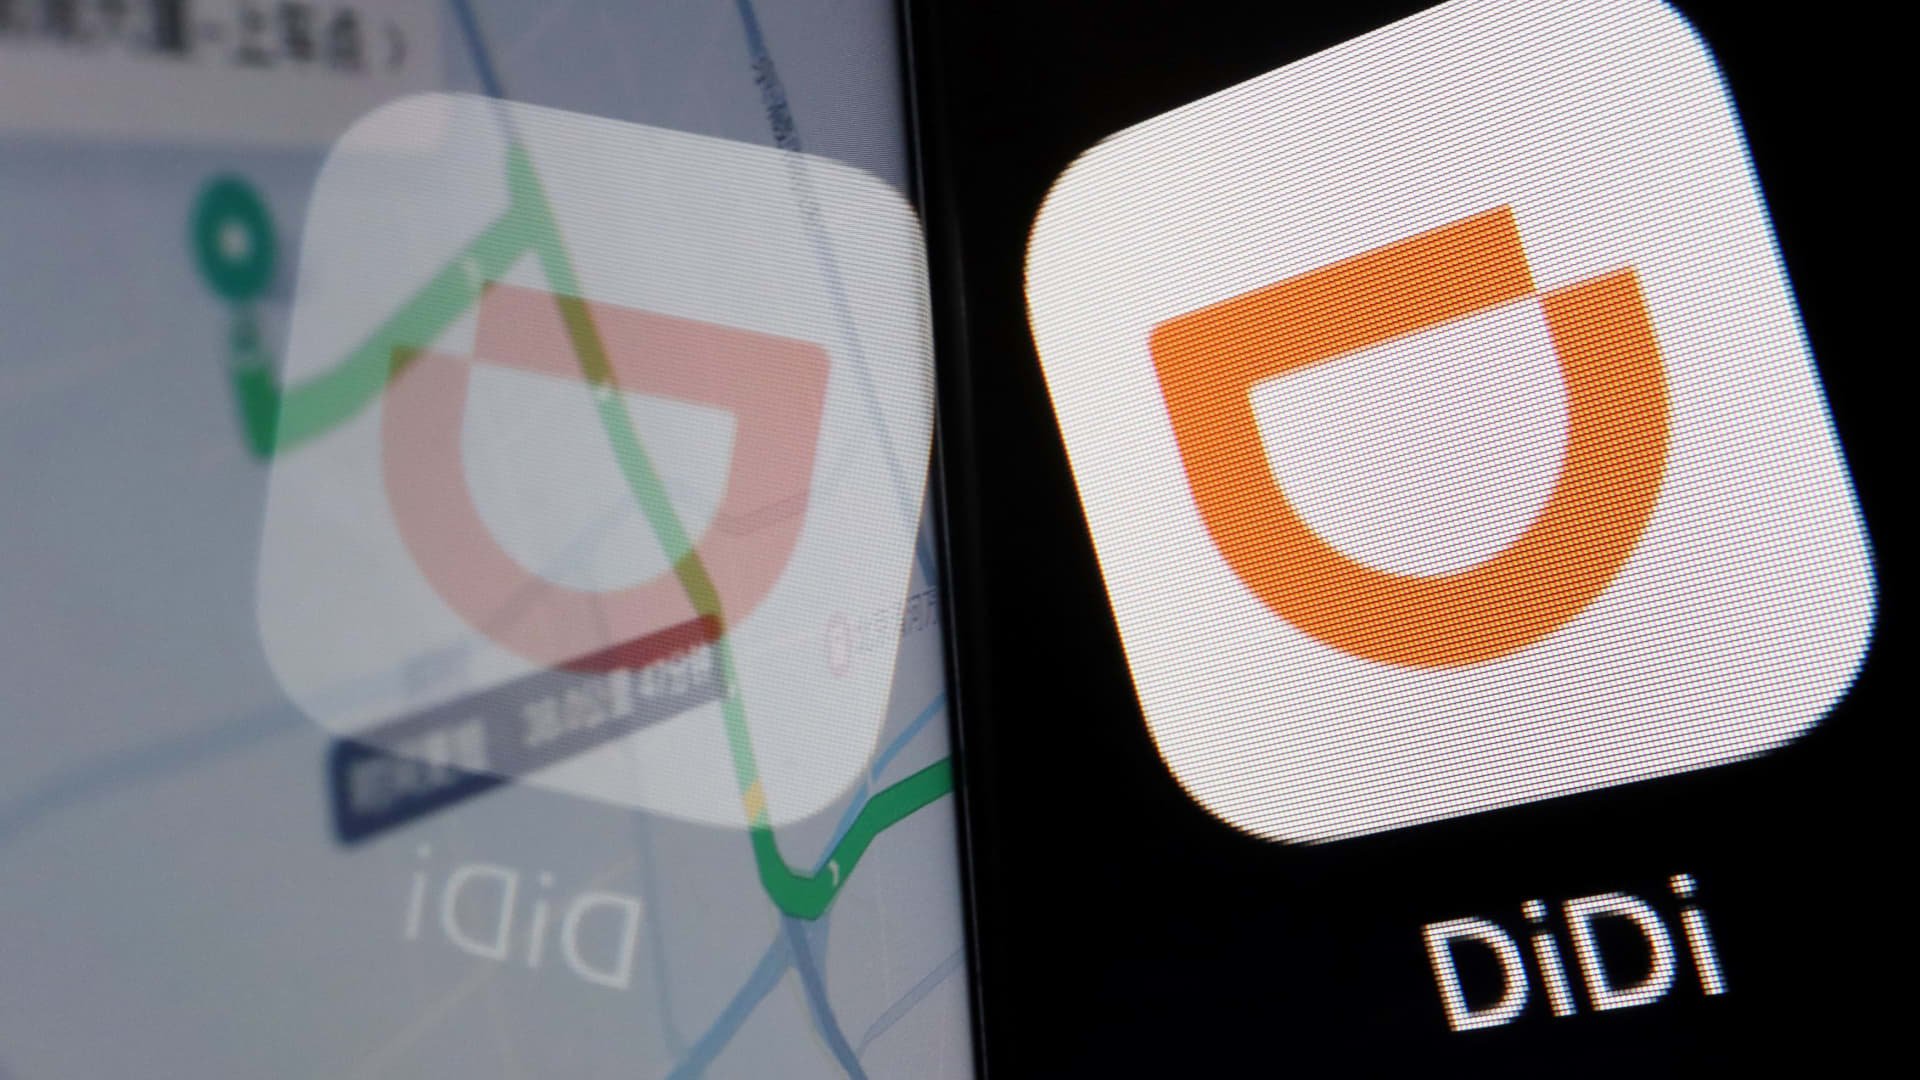 Didi removed from China's WeChat and Alipay apps for new users in another big blow